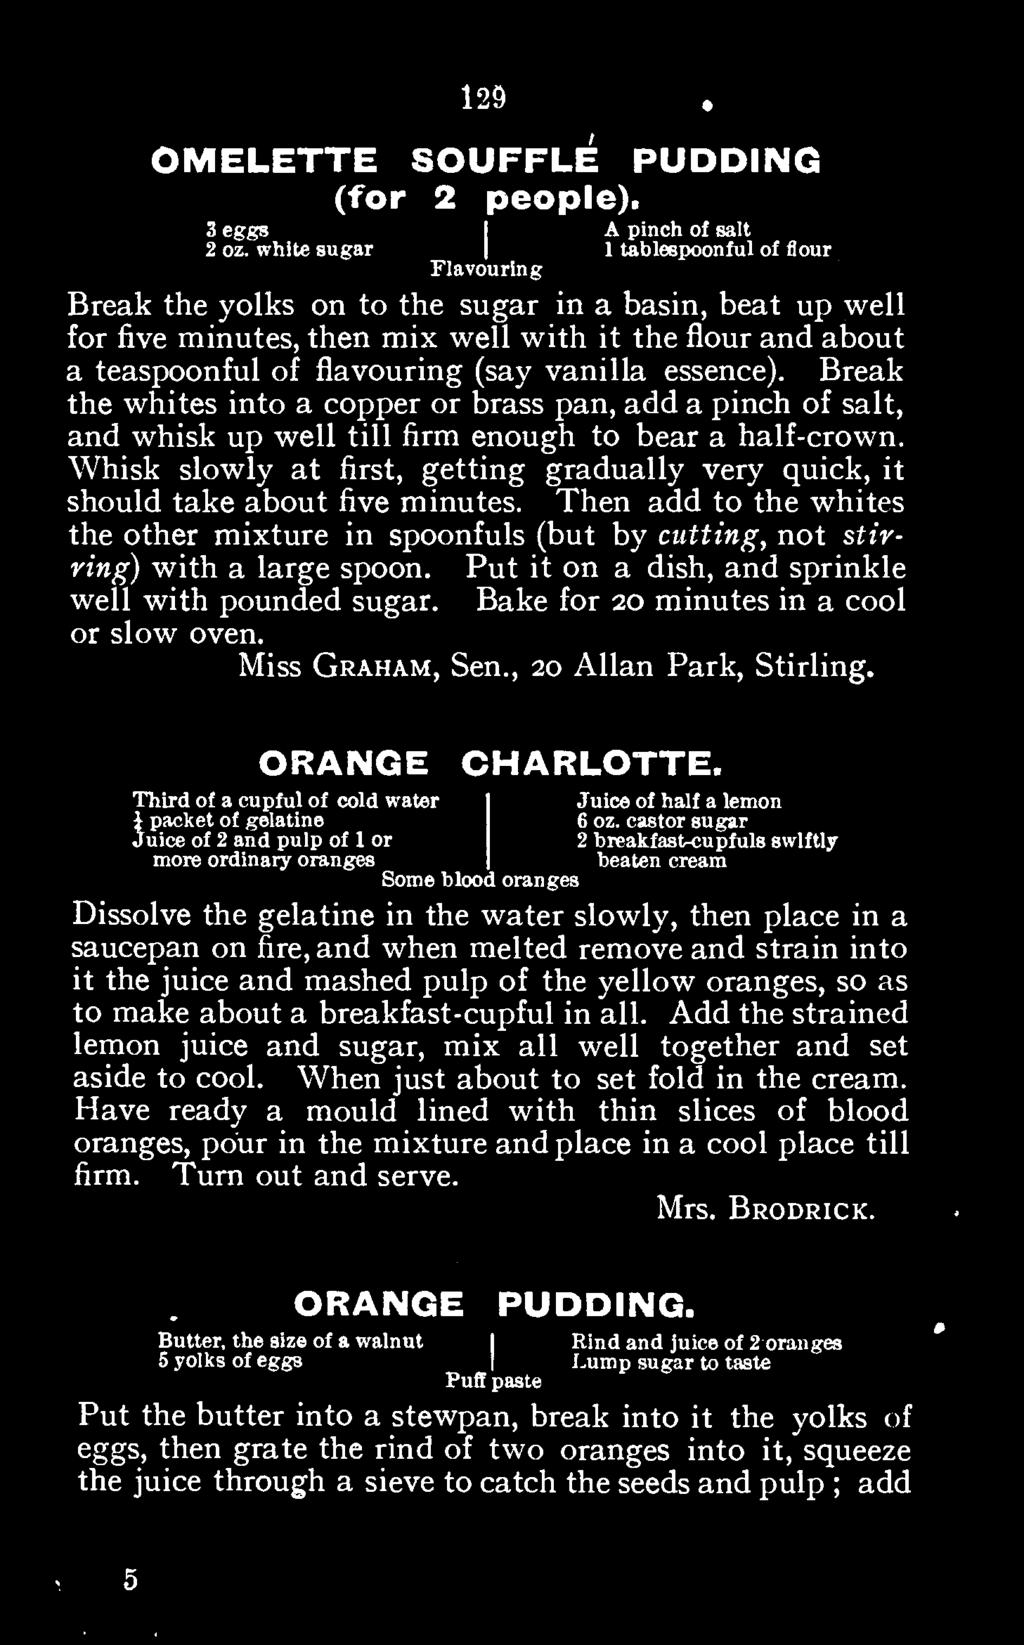 Put it on a dish, and sprinkle well with pounded sugar. Bake for 20 minutes in a cool or slow oven. Miss Graham, Sen., 20 Allan Park, Stirling. ORANGE CHARLOTTE.